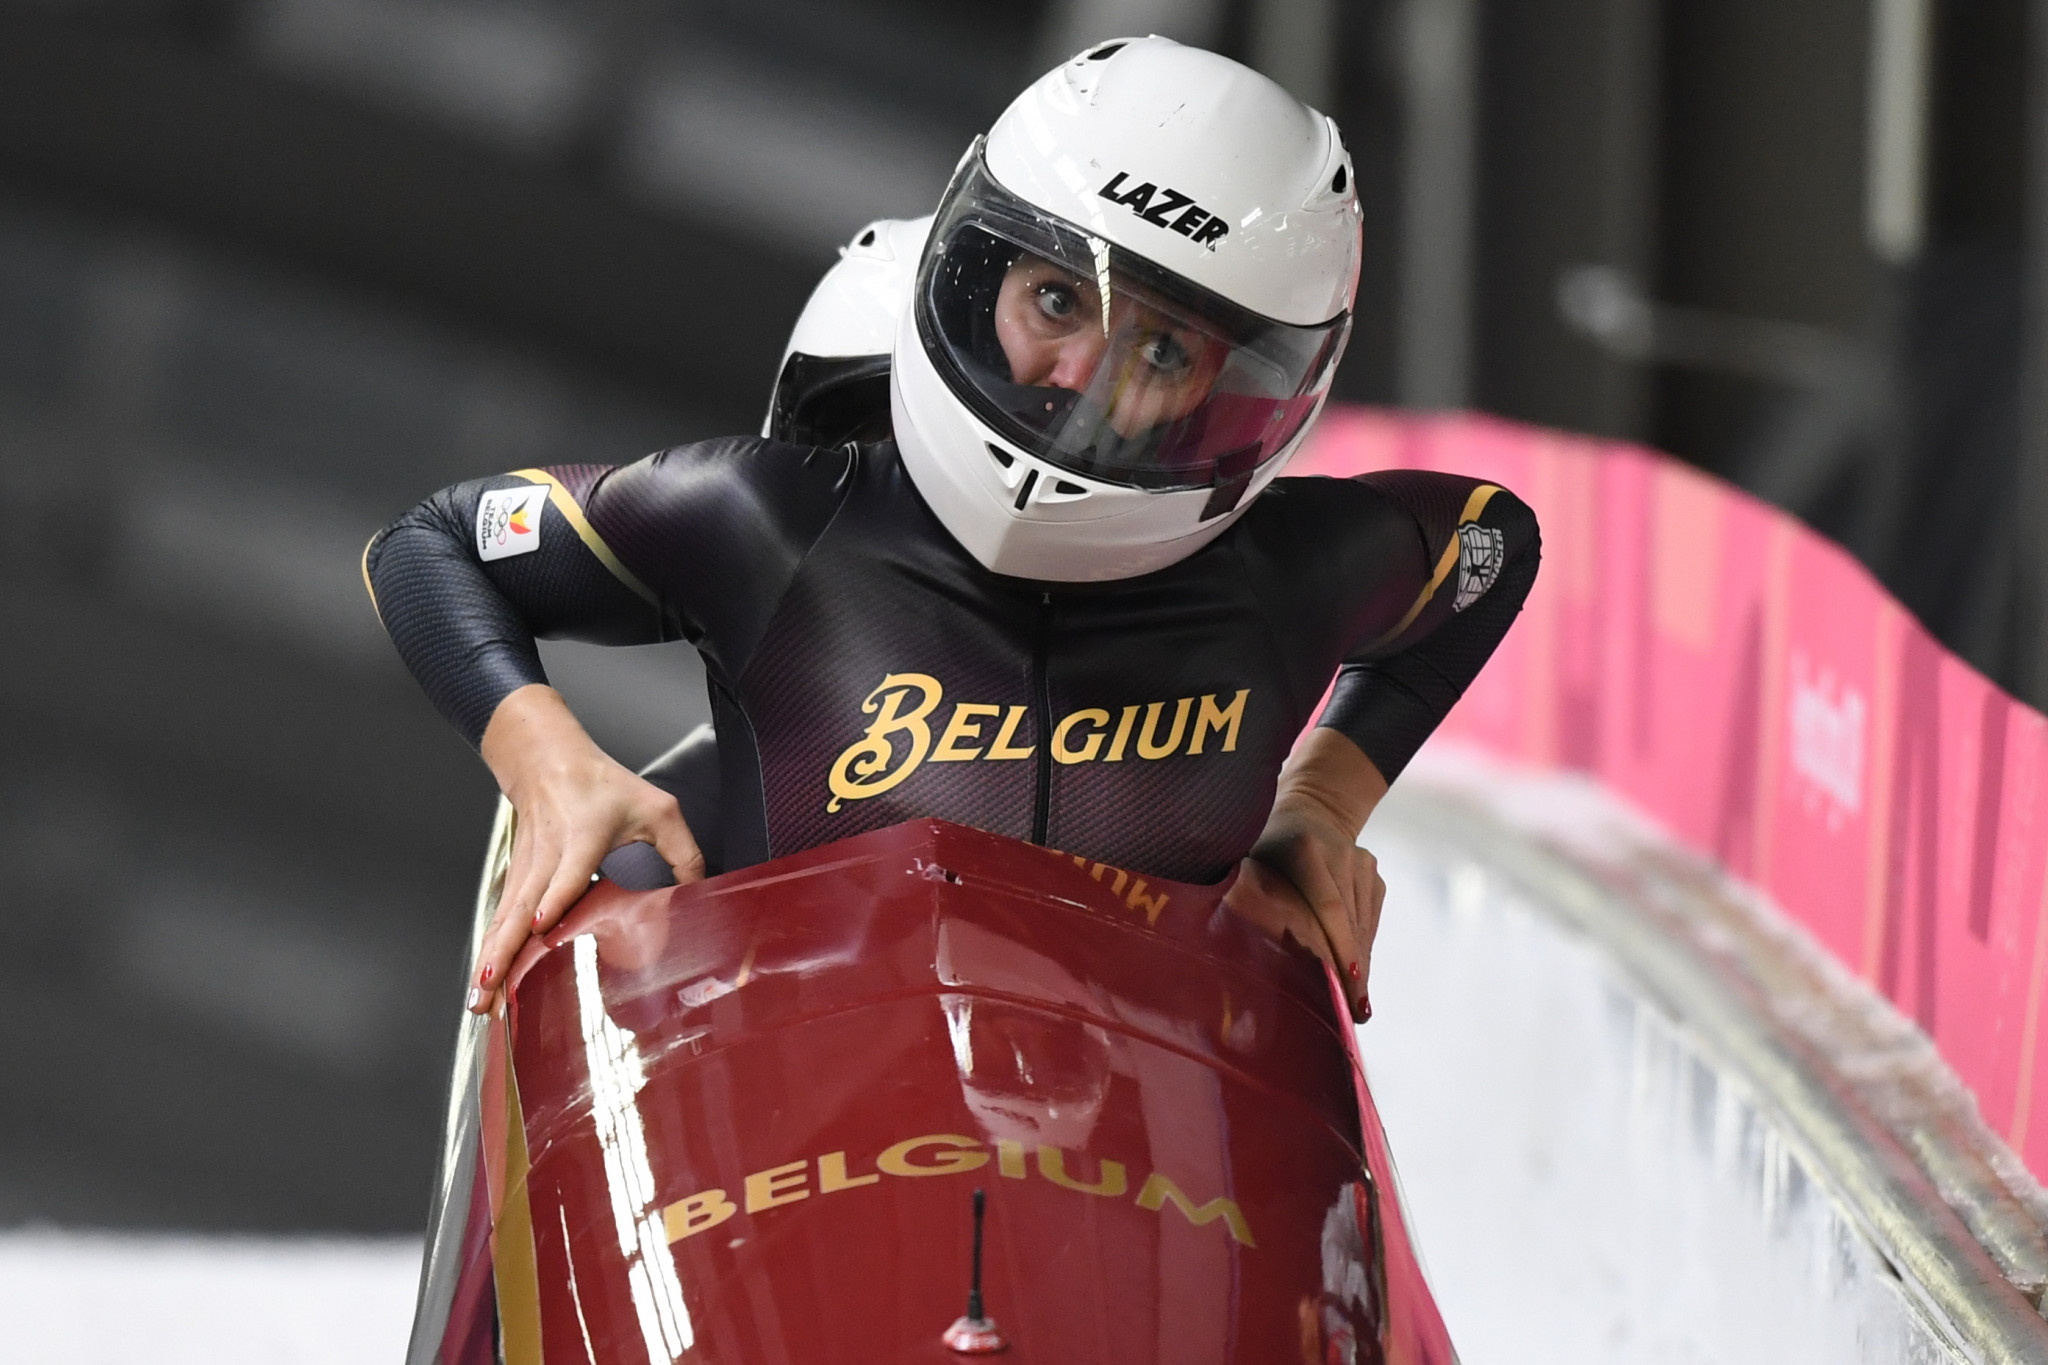 Belgium's Elfje Willemsen, a former bobsleigh and skeleton athlete, was present at the IBSF camp ©Getty Images